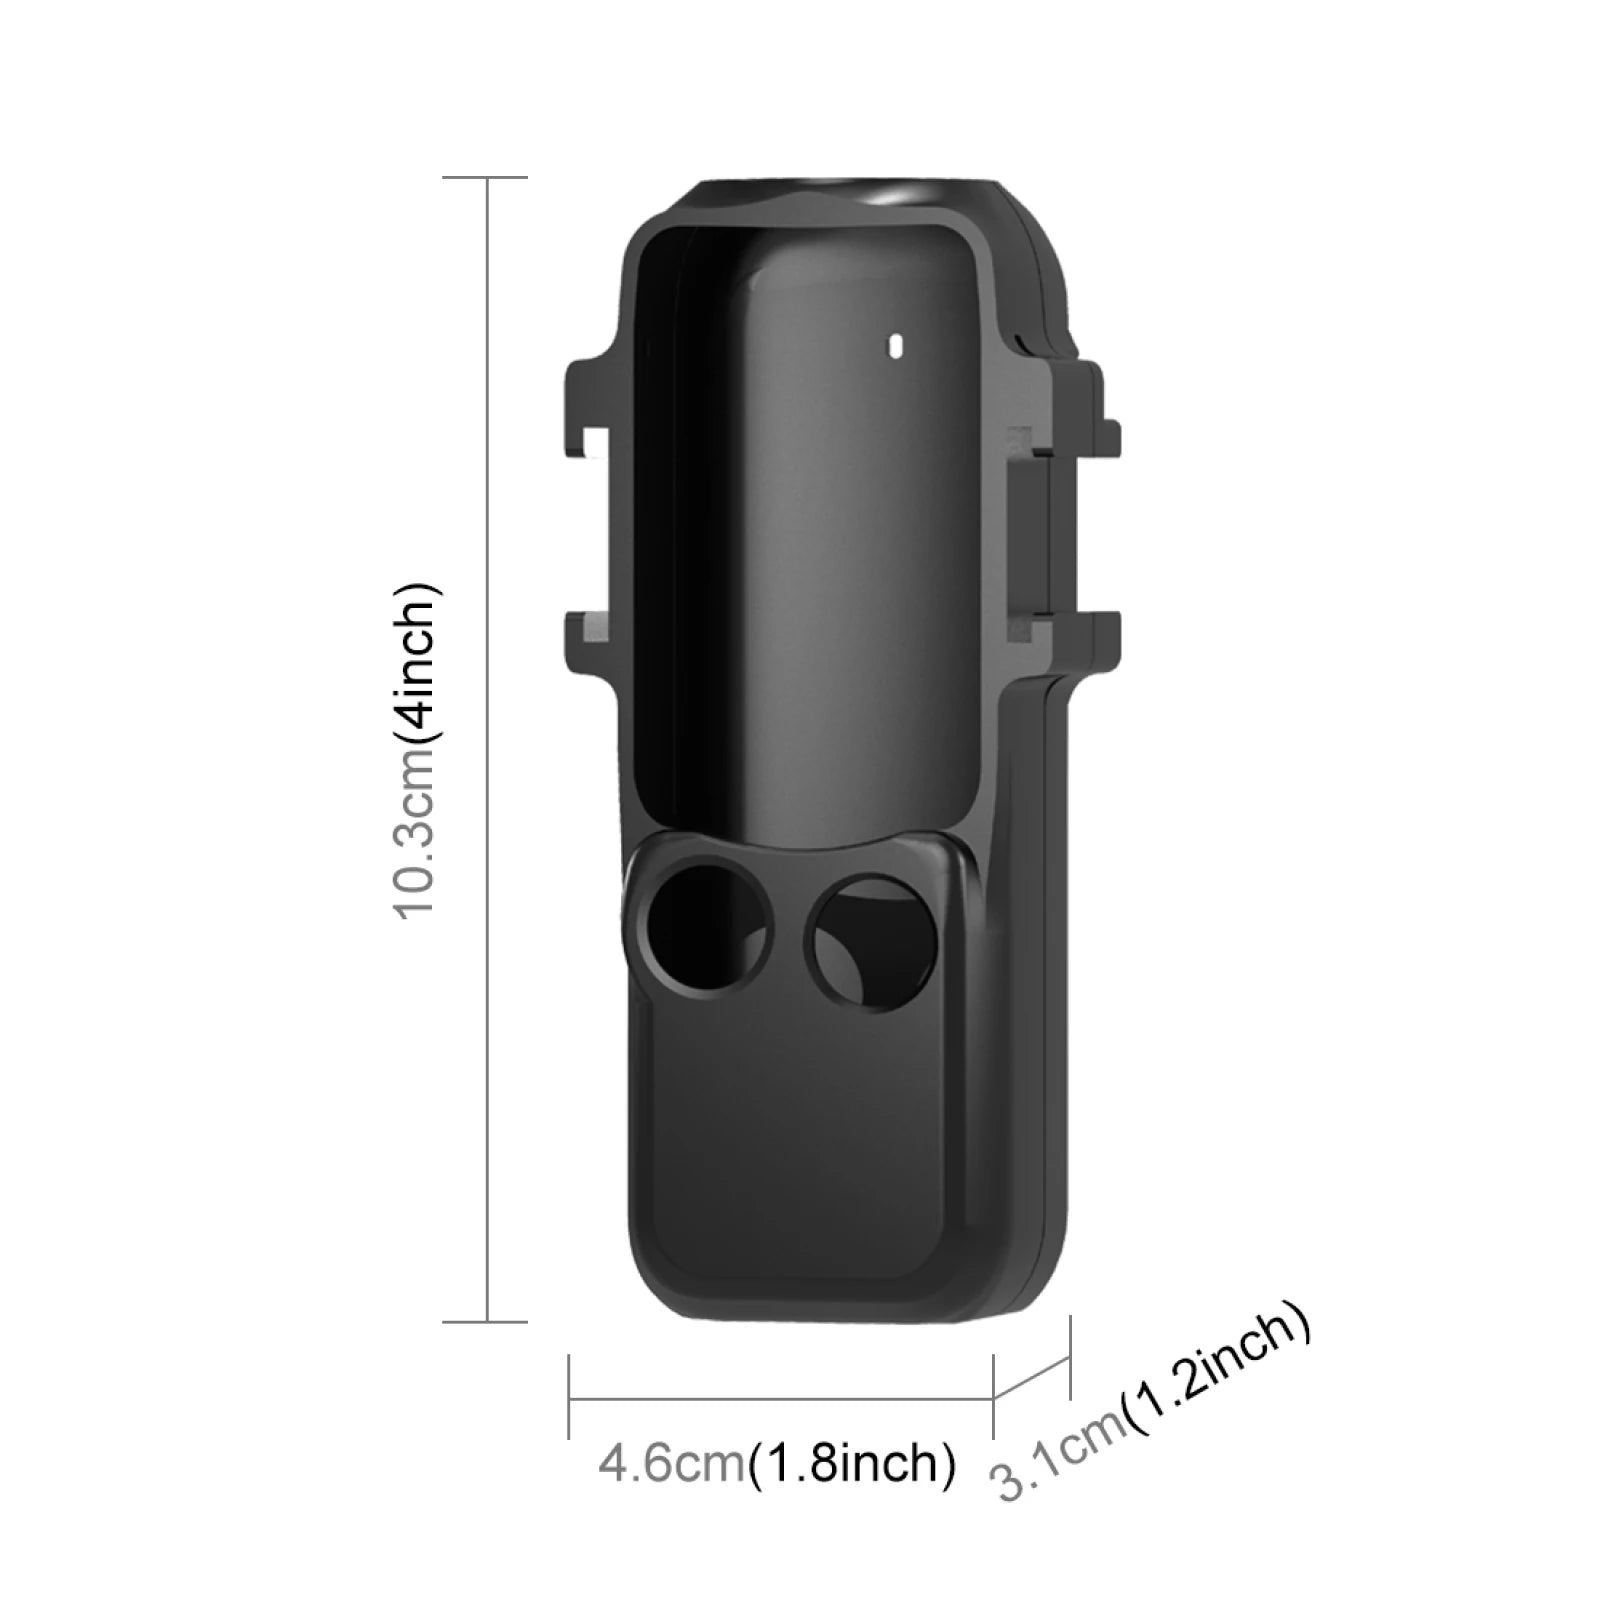 Metal Protection Frame Case for DJI OSMO Pocket 3 Cage Adapter Bracket with Dual Cold Shoes